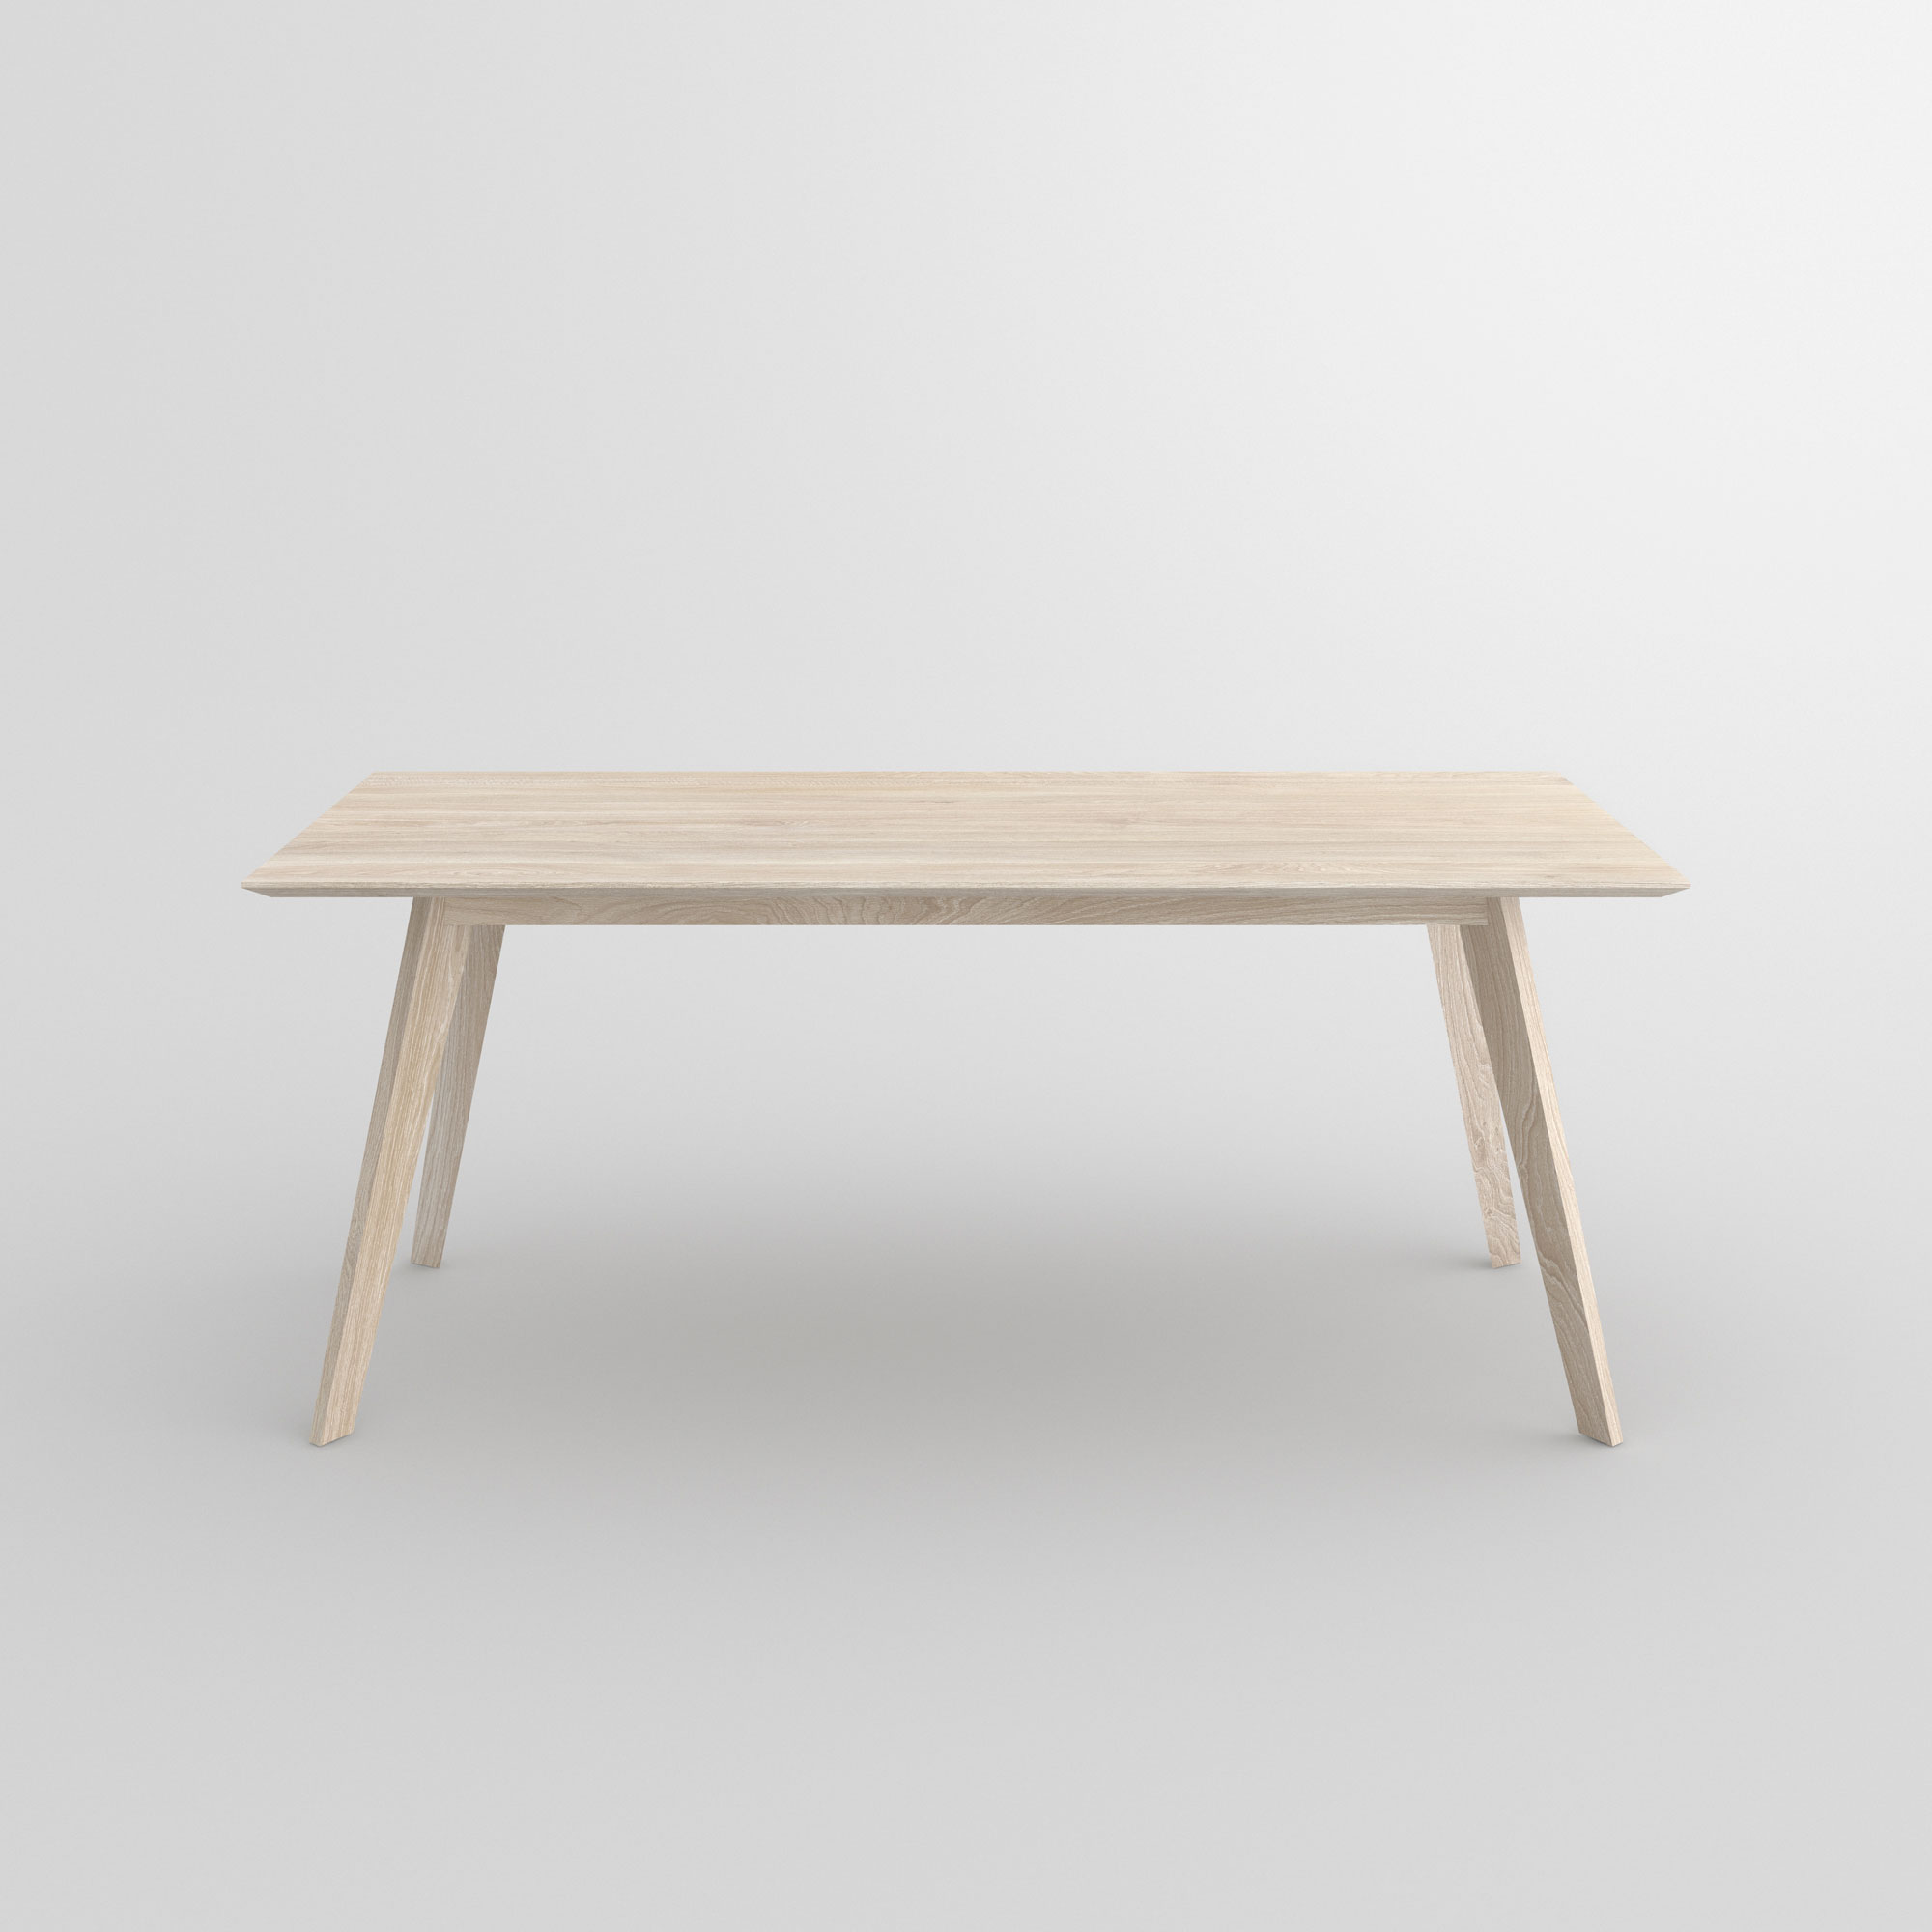 Solid Wood Dining Table CITIUS cam2 custom made in solid wood by vitamin design